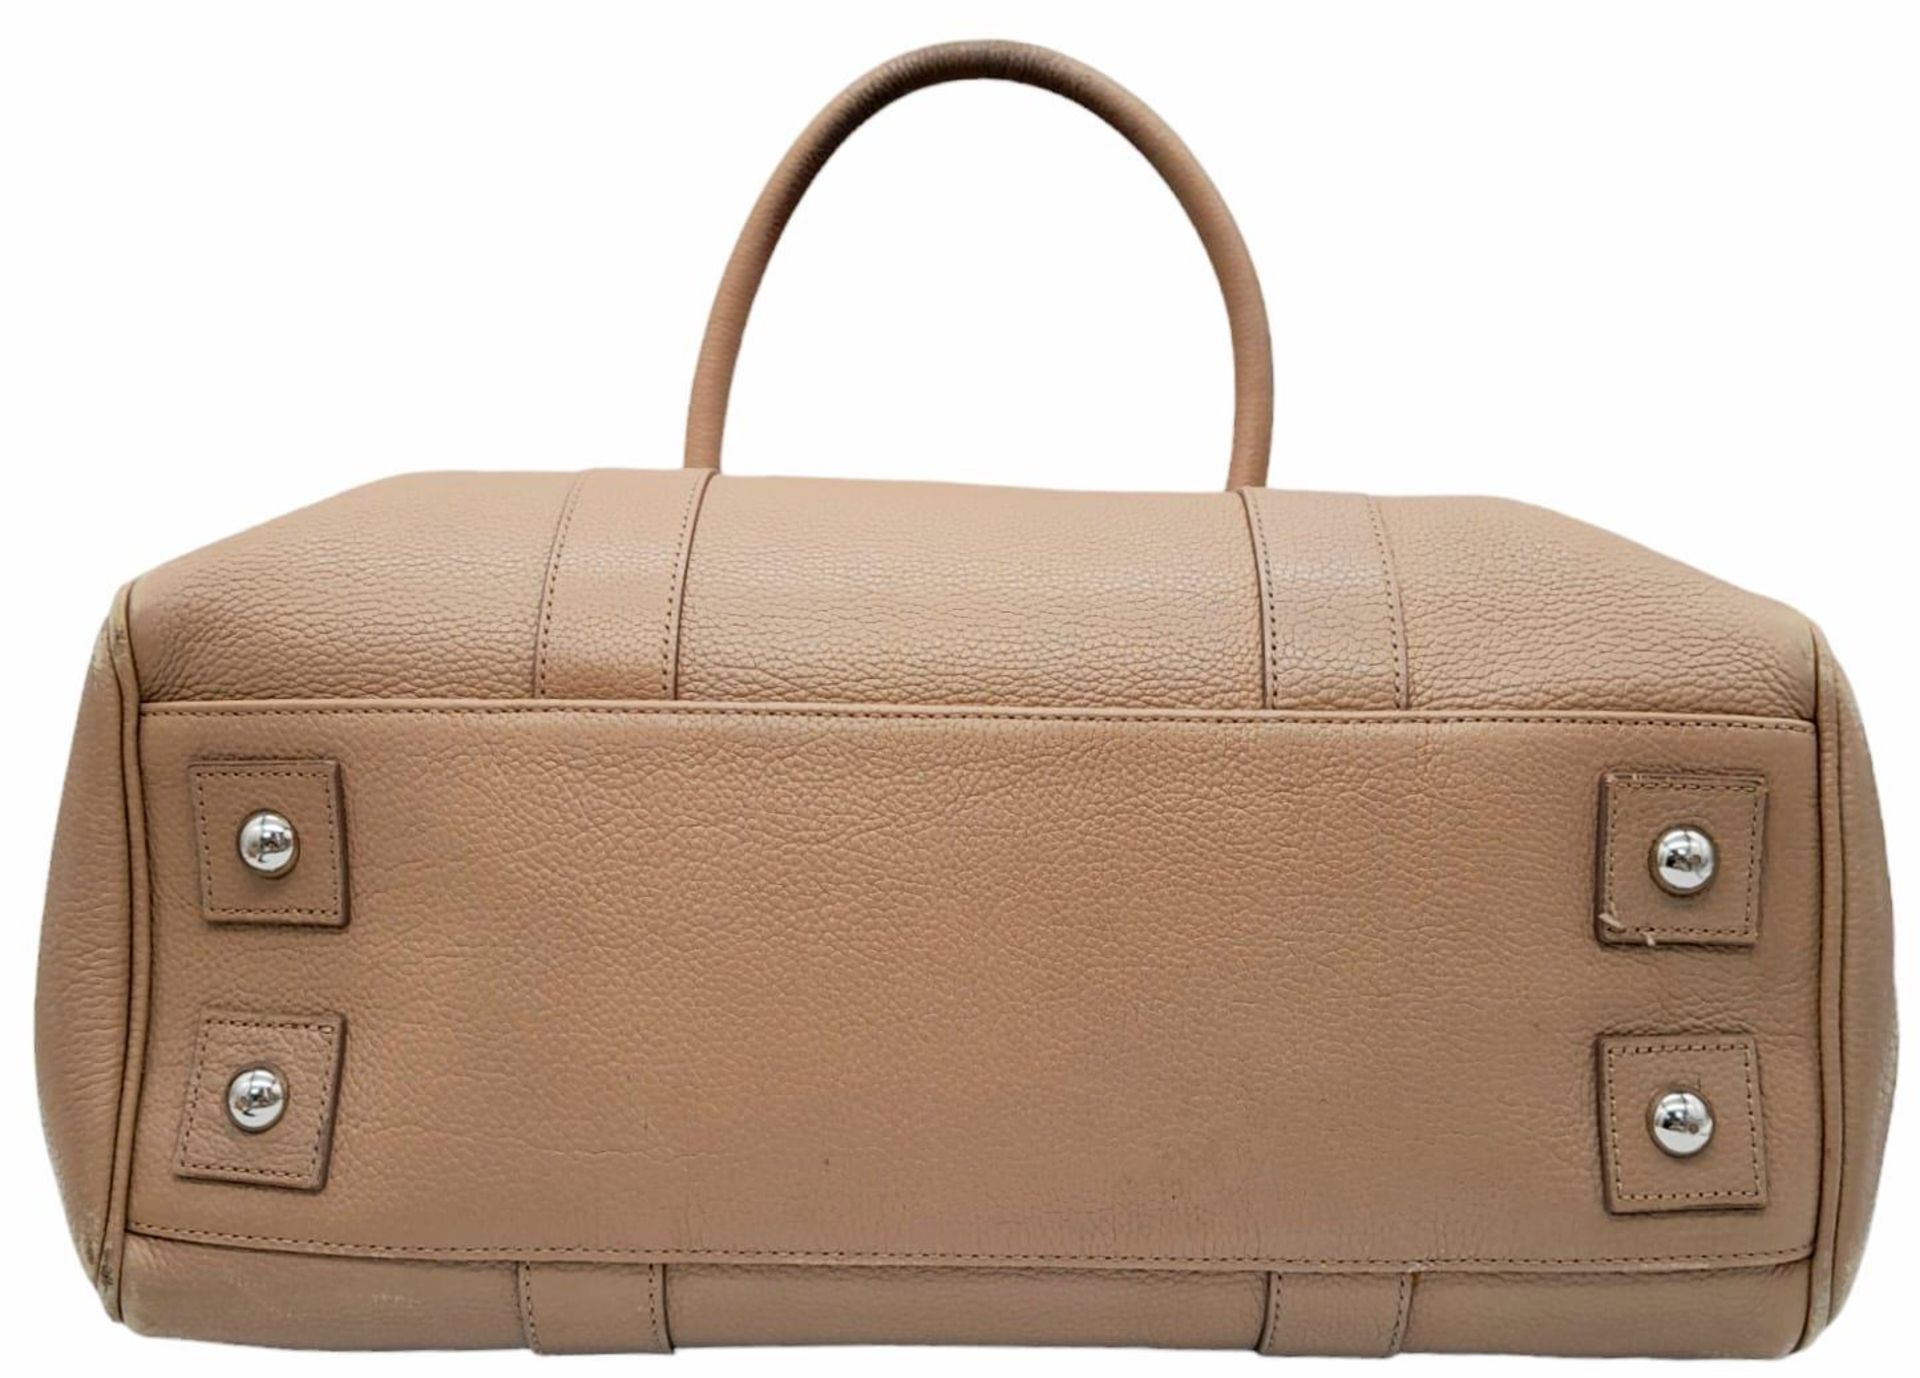 A Mulberry Light Brown Grained Leather Bayswater Satchel Bag. Silver Tone Hardware, A Turn Lock on - Image 4 of 11